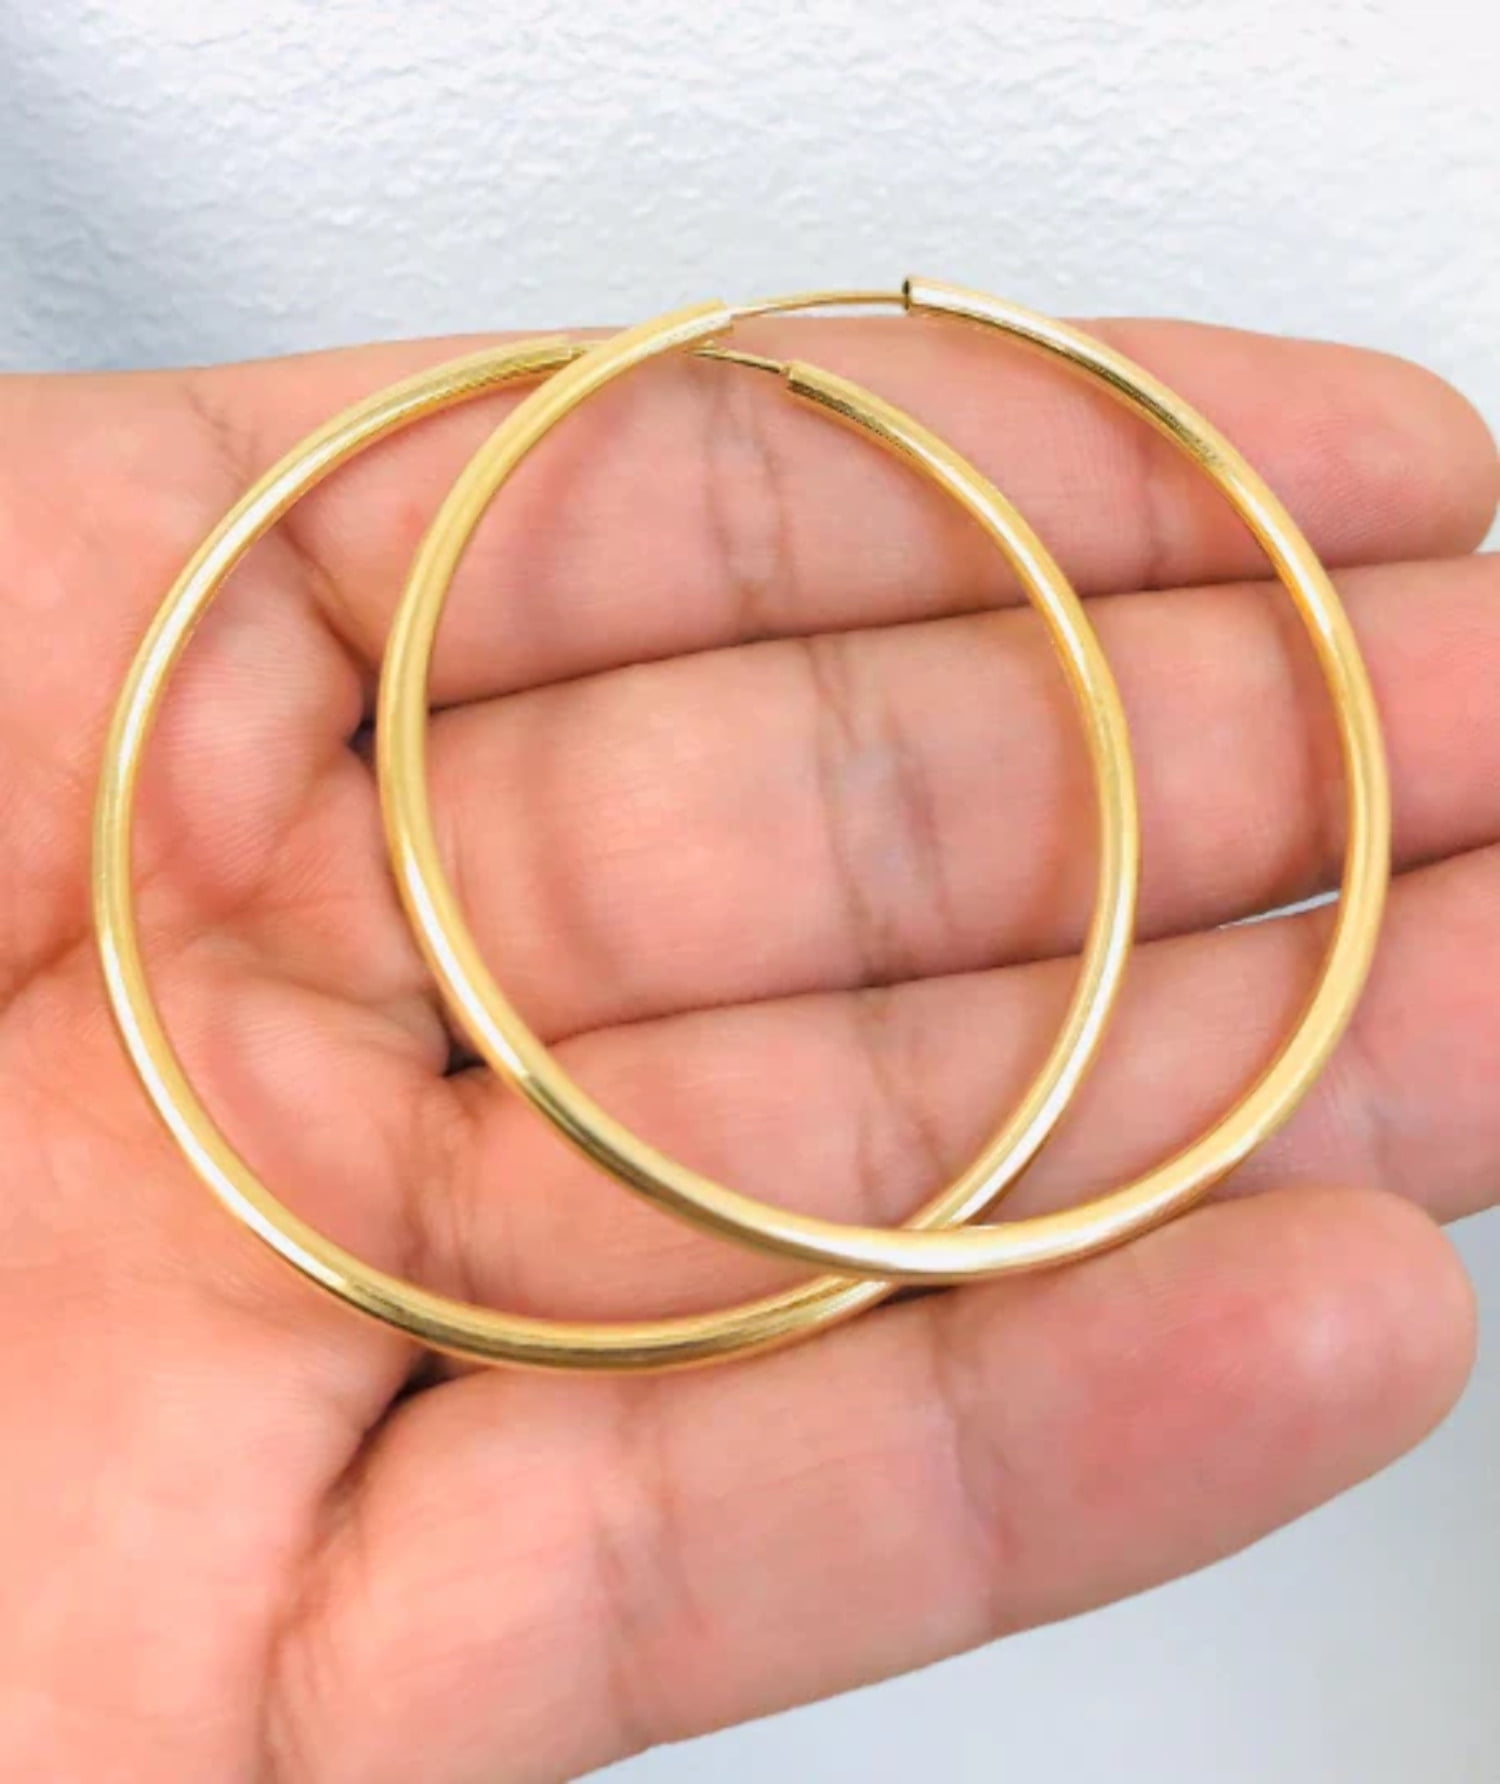 Endless Gold Hoop Earrings 14K Yellow Gold / 45mm Diameter by Baby Gold - Shop Custom Gold Jewelry